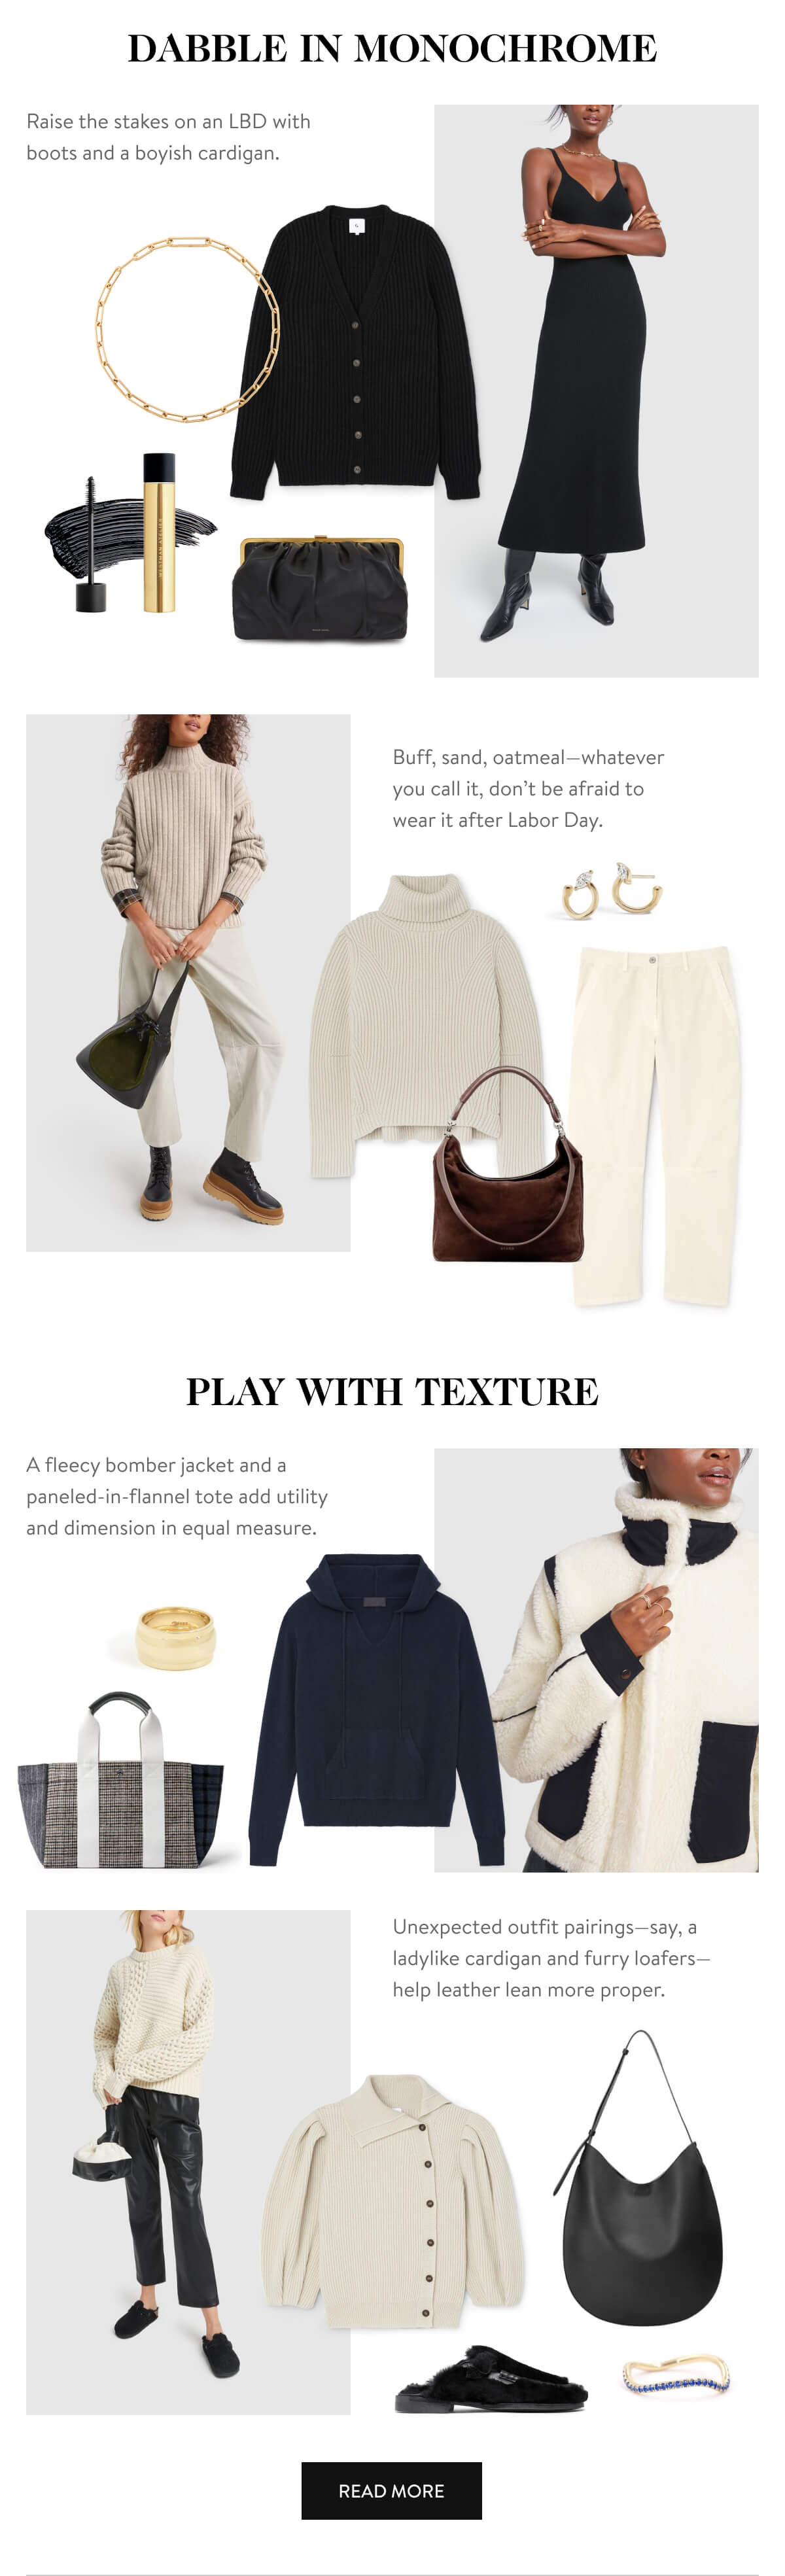 4 Nonboring Takes on Neutral Dressing - read more